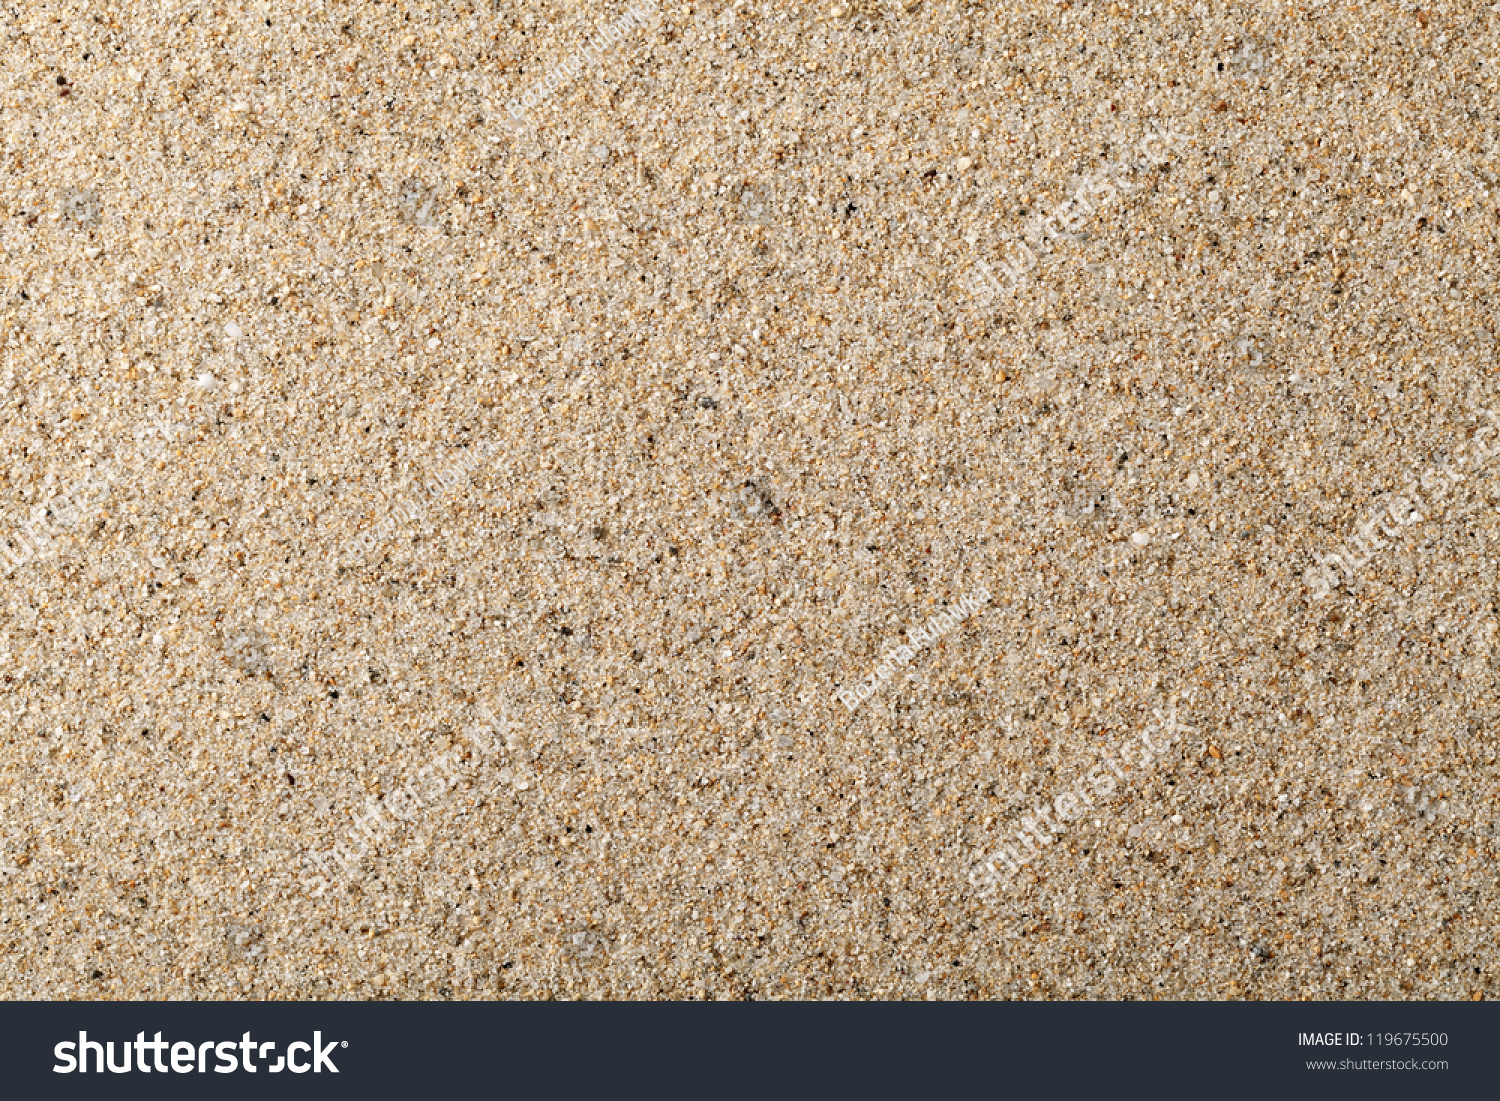 Sand Texture Background Close Top View Stock Photo 119675500 | Shutterstock